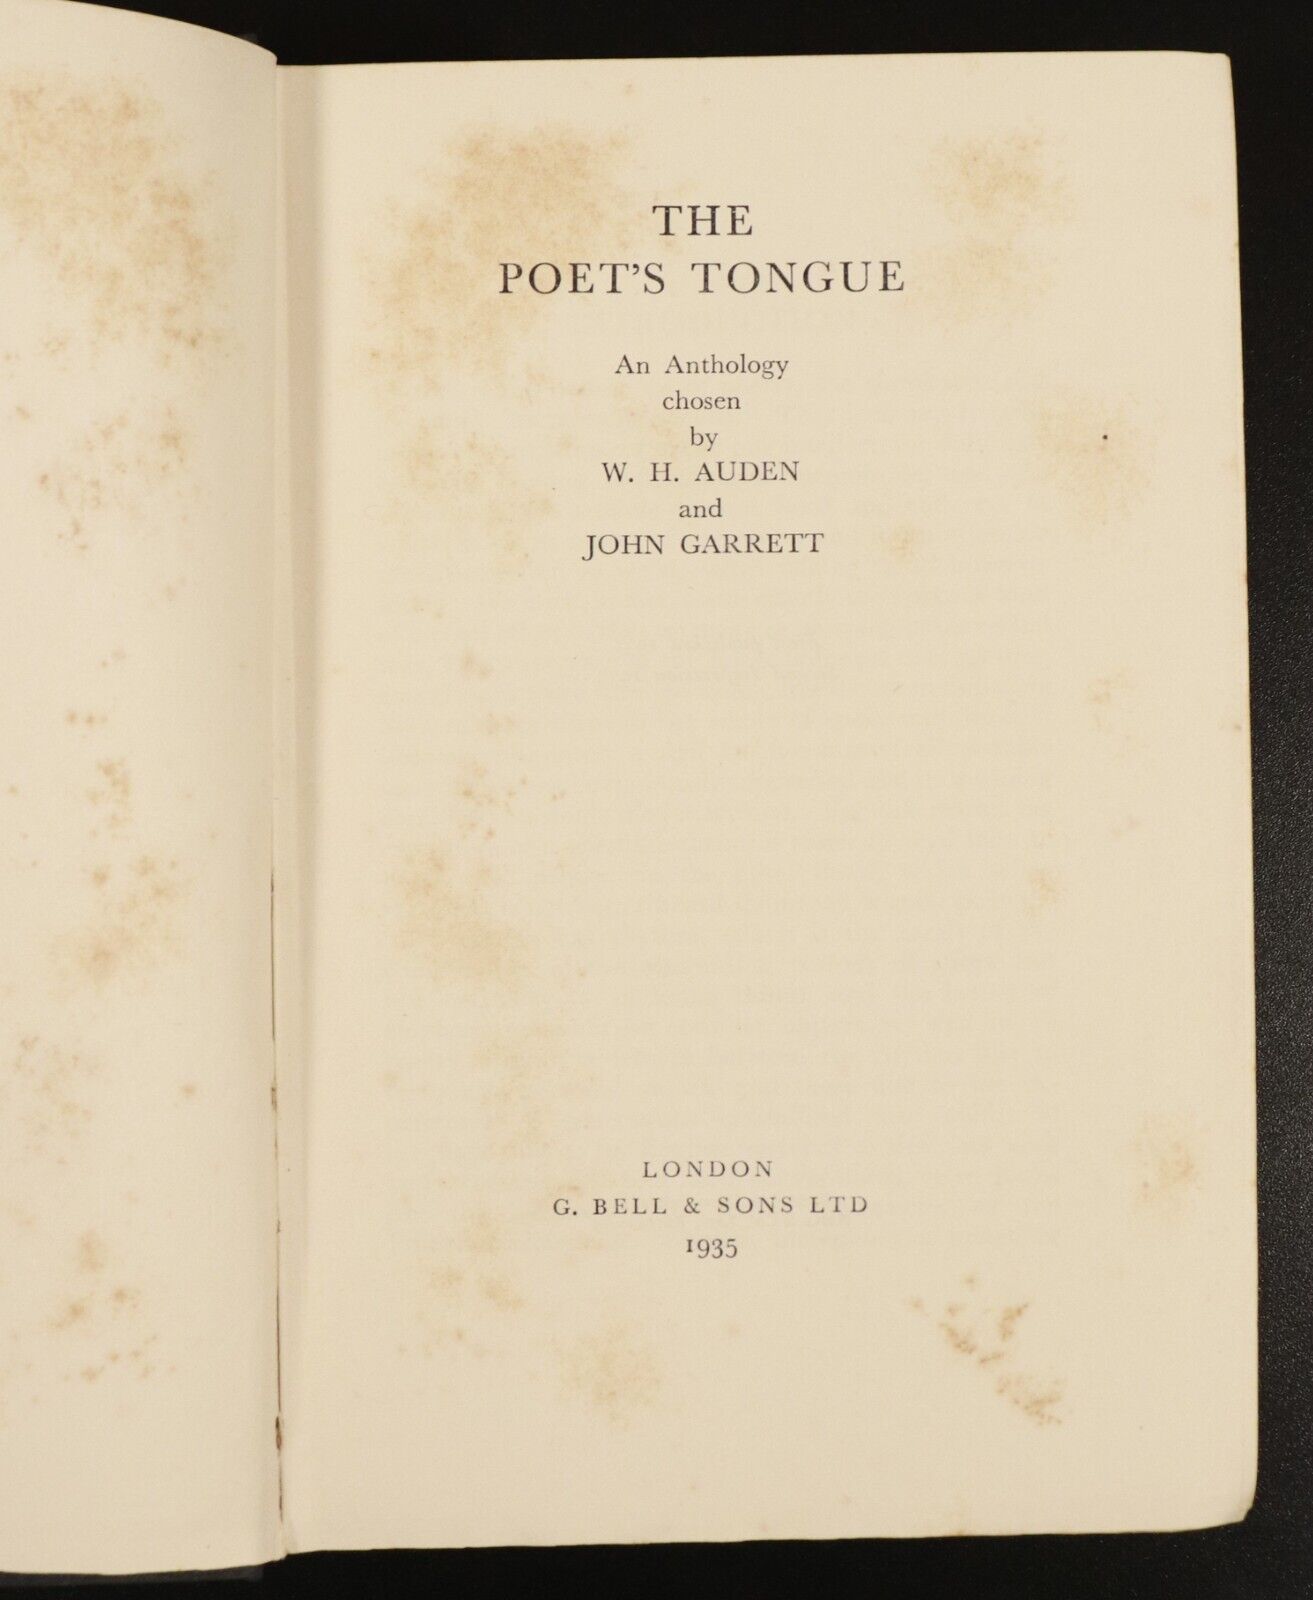 1935 The Poets Tongue An Anthology Antique Poetry Book by WH Auden & J Garrett - 0